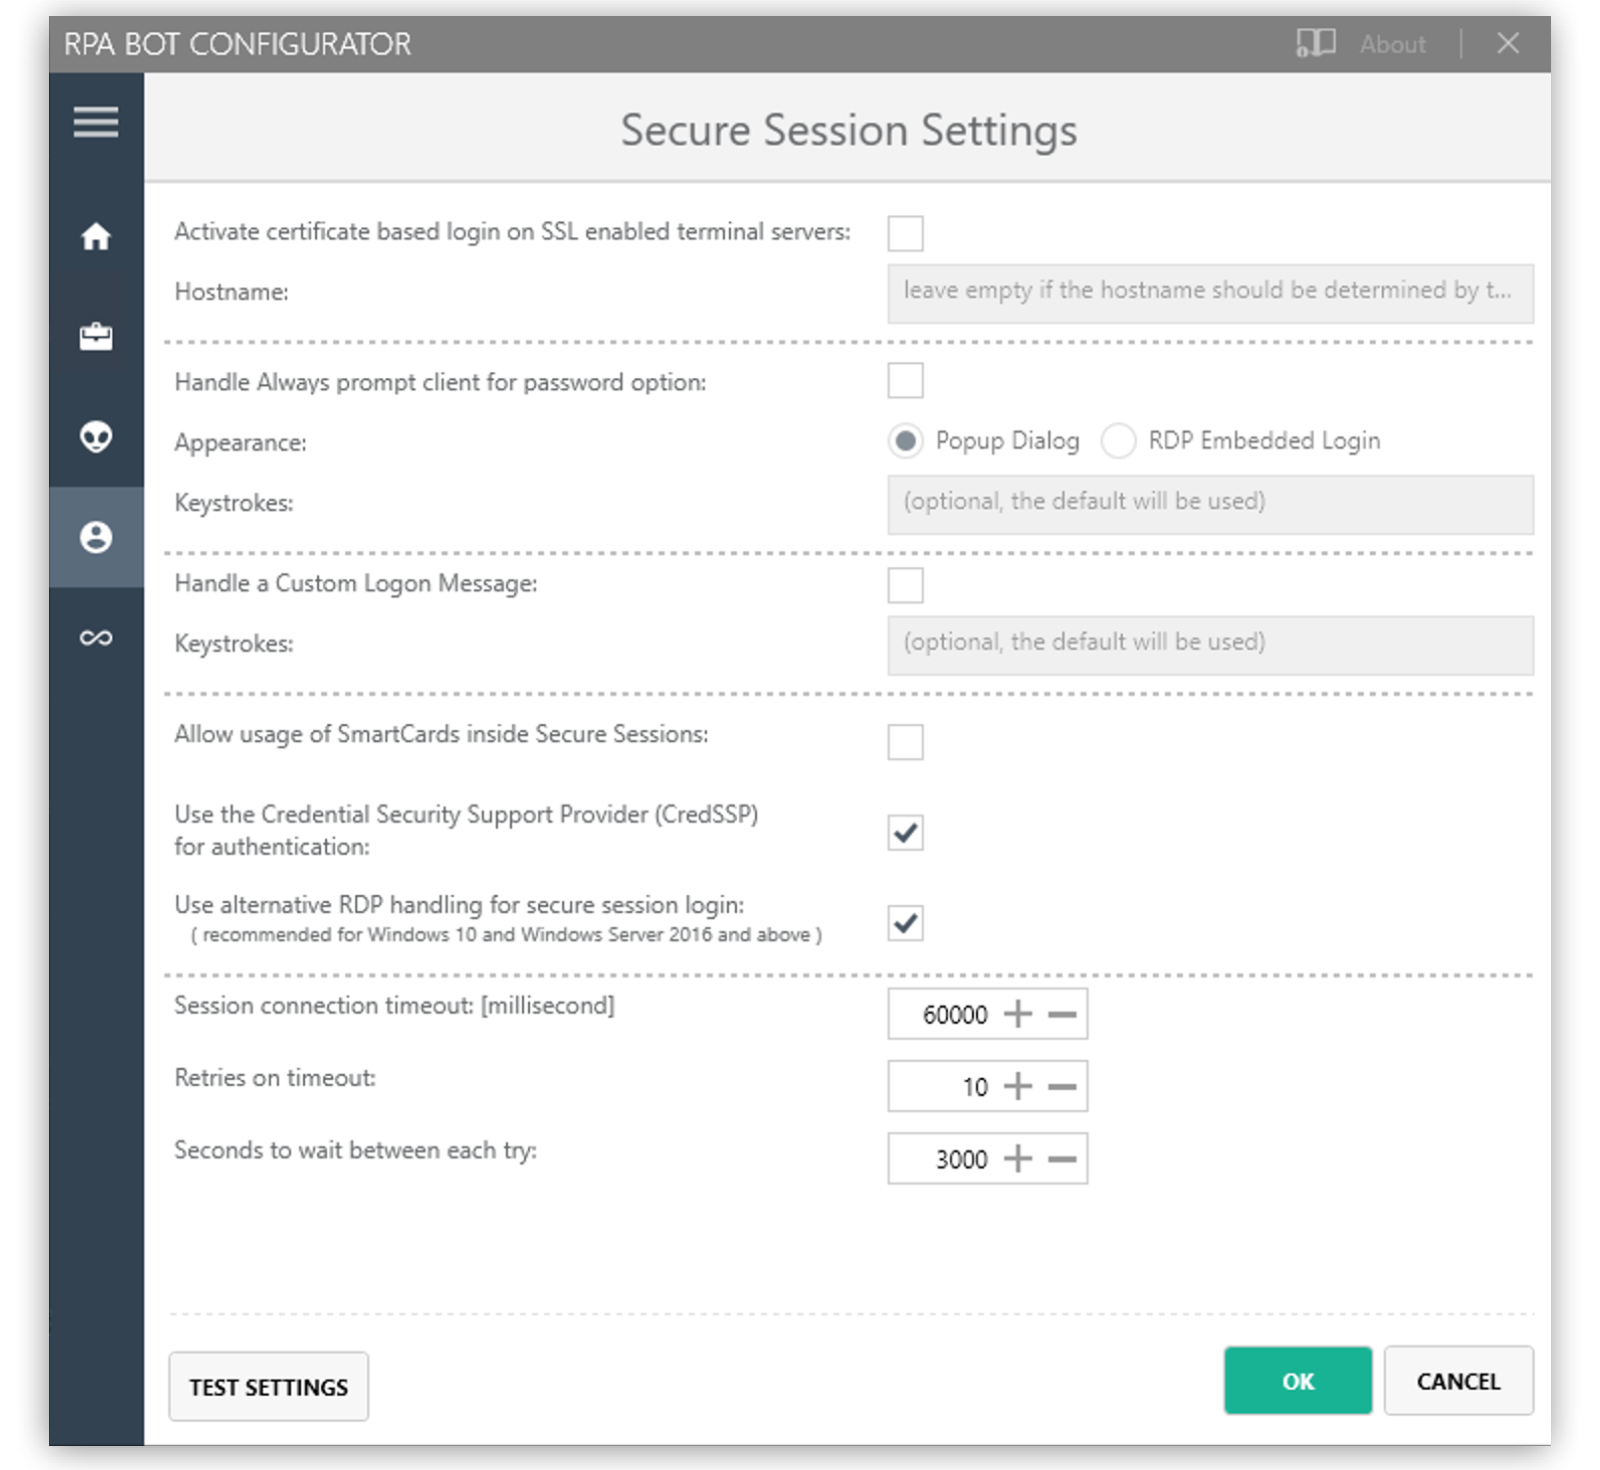 The RPA Bot Configurator application showing the Secure Session Settings panel